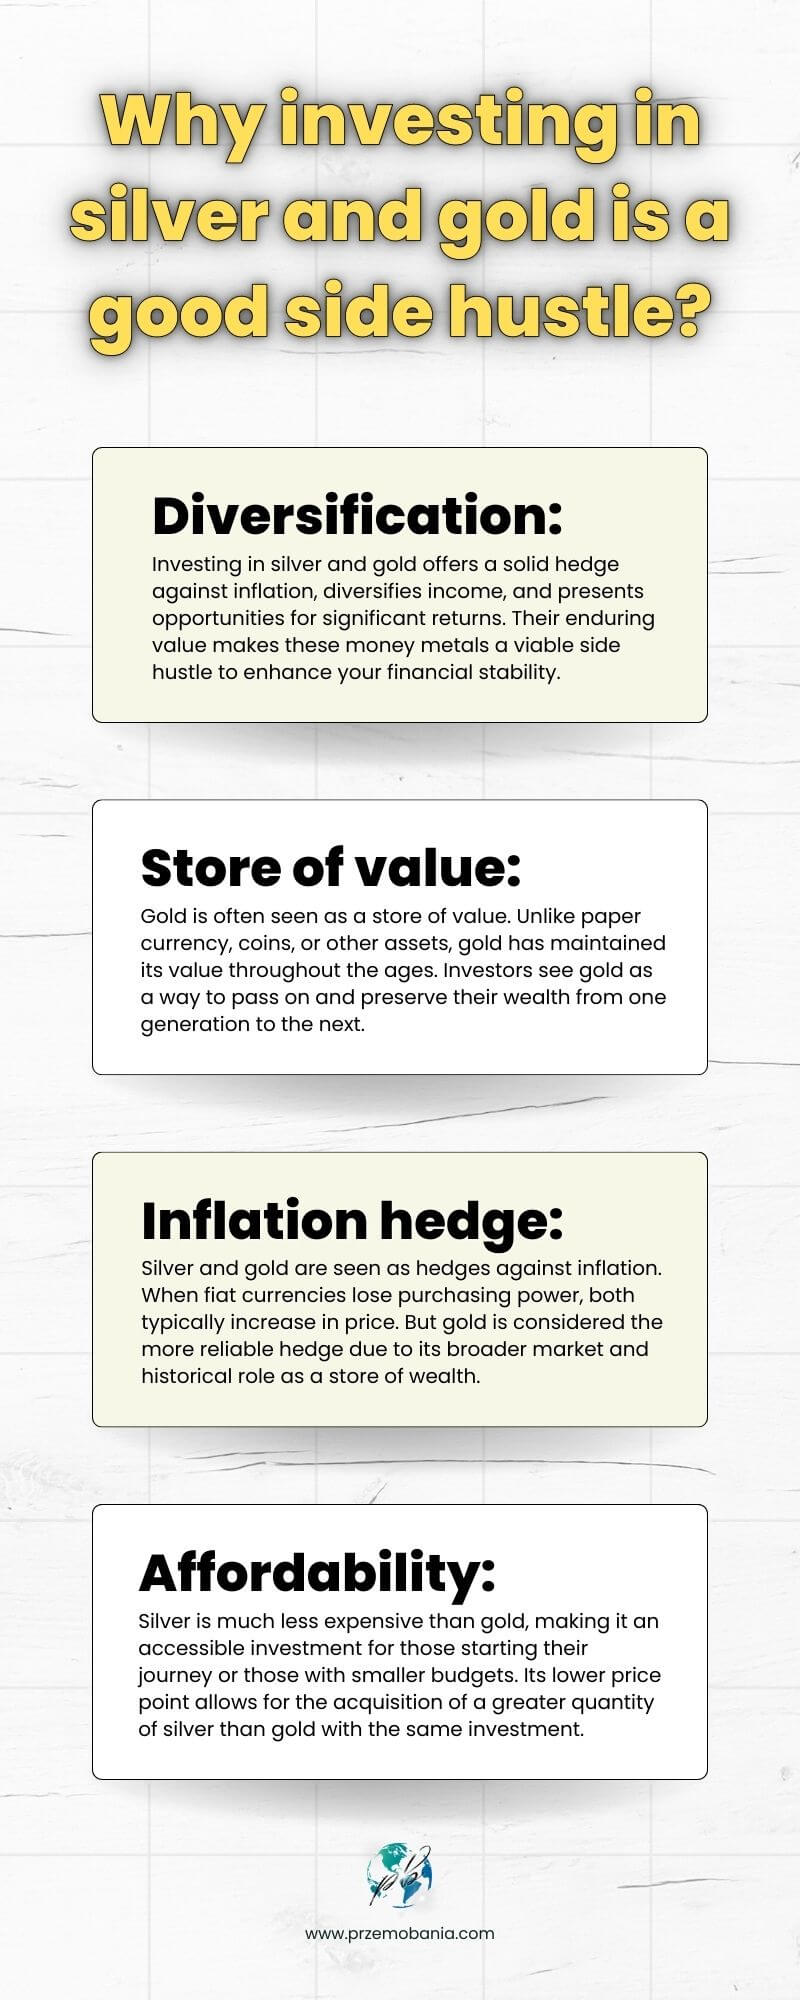 Why investing in silver and gold is a good side hustle infographic